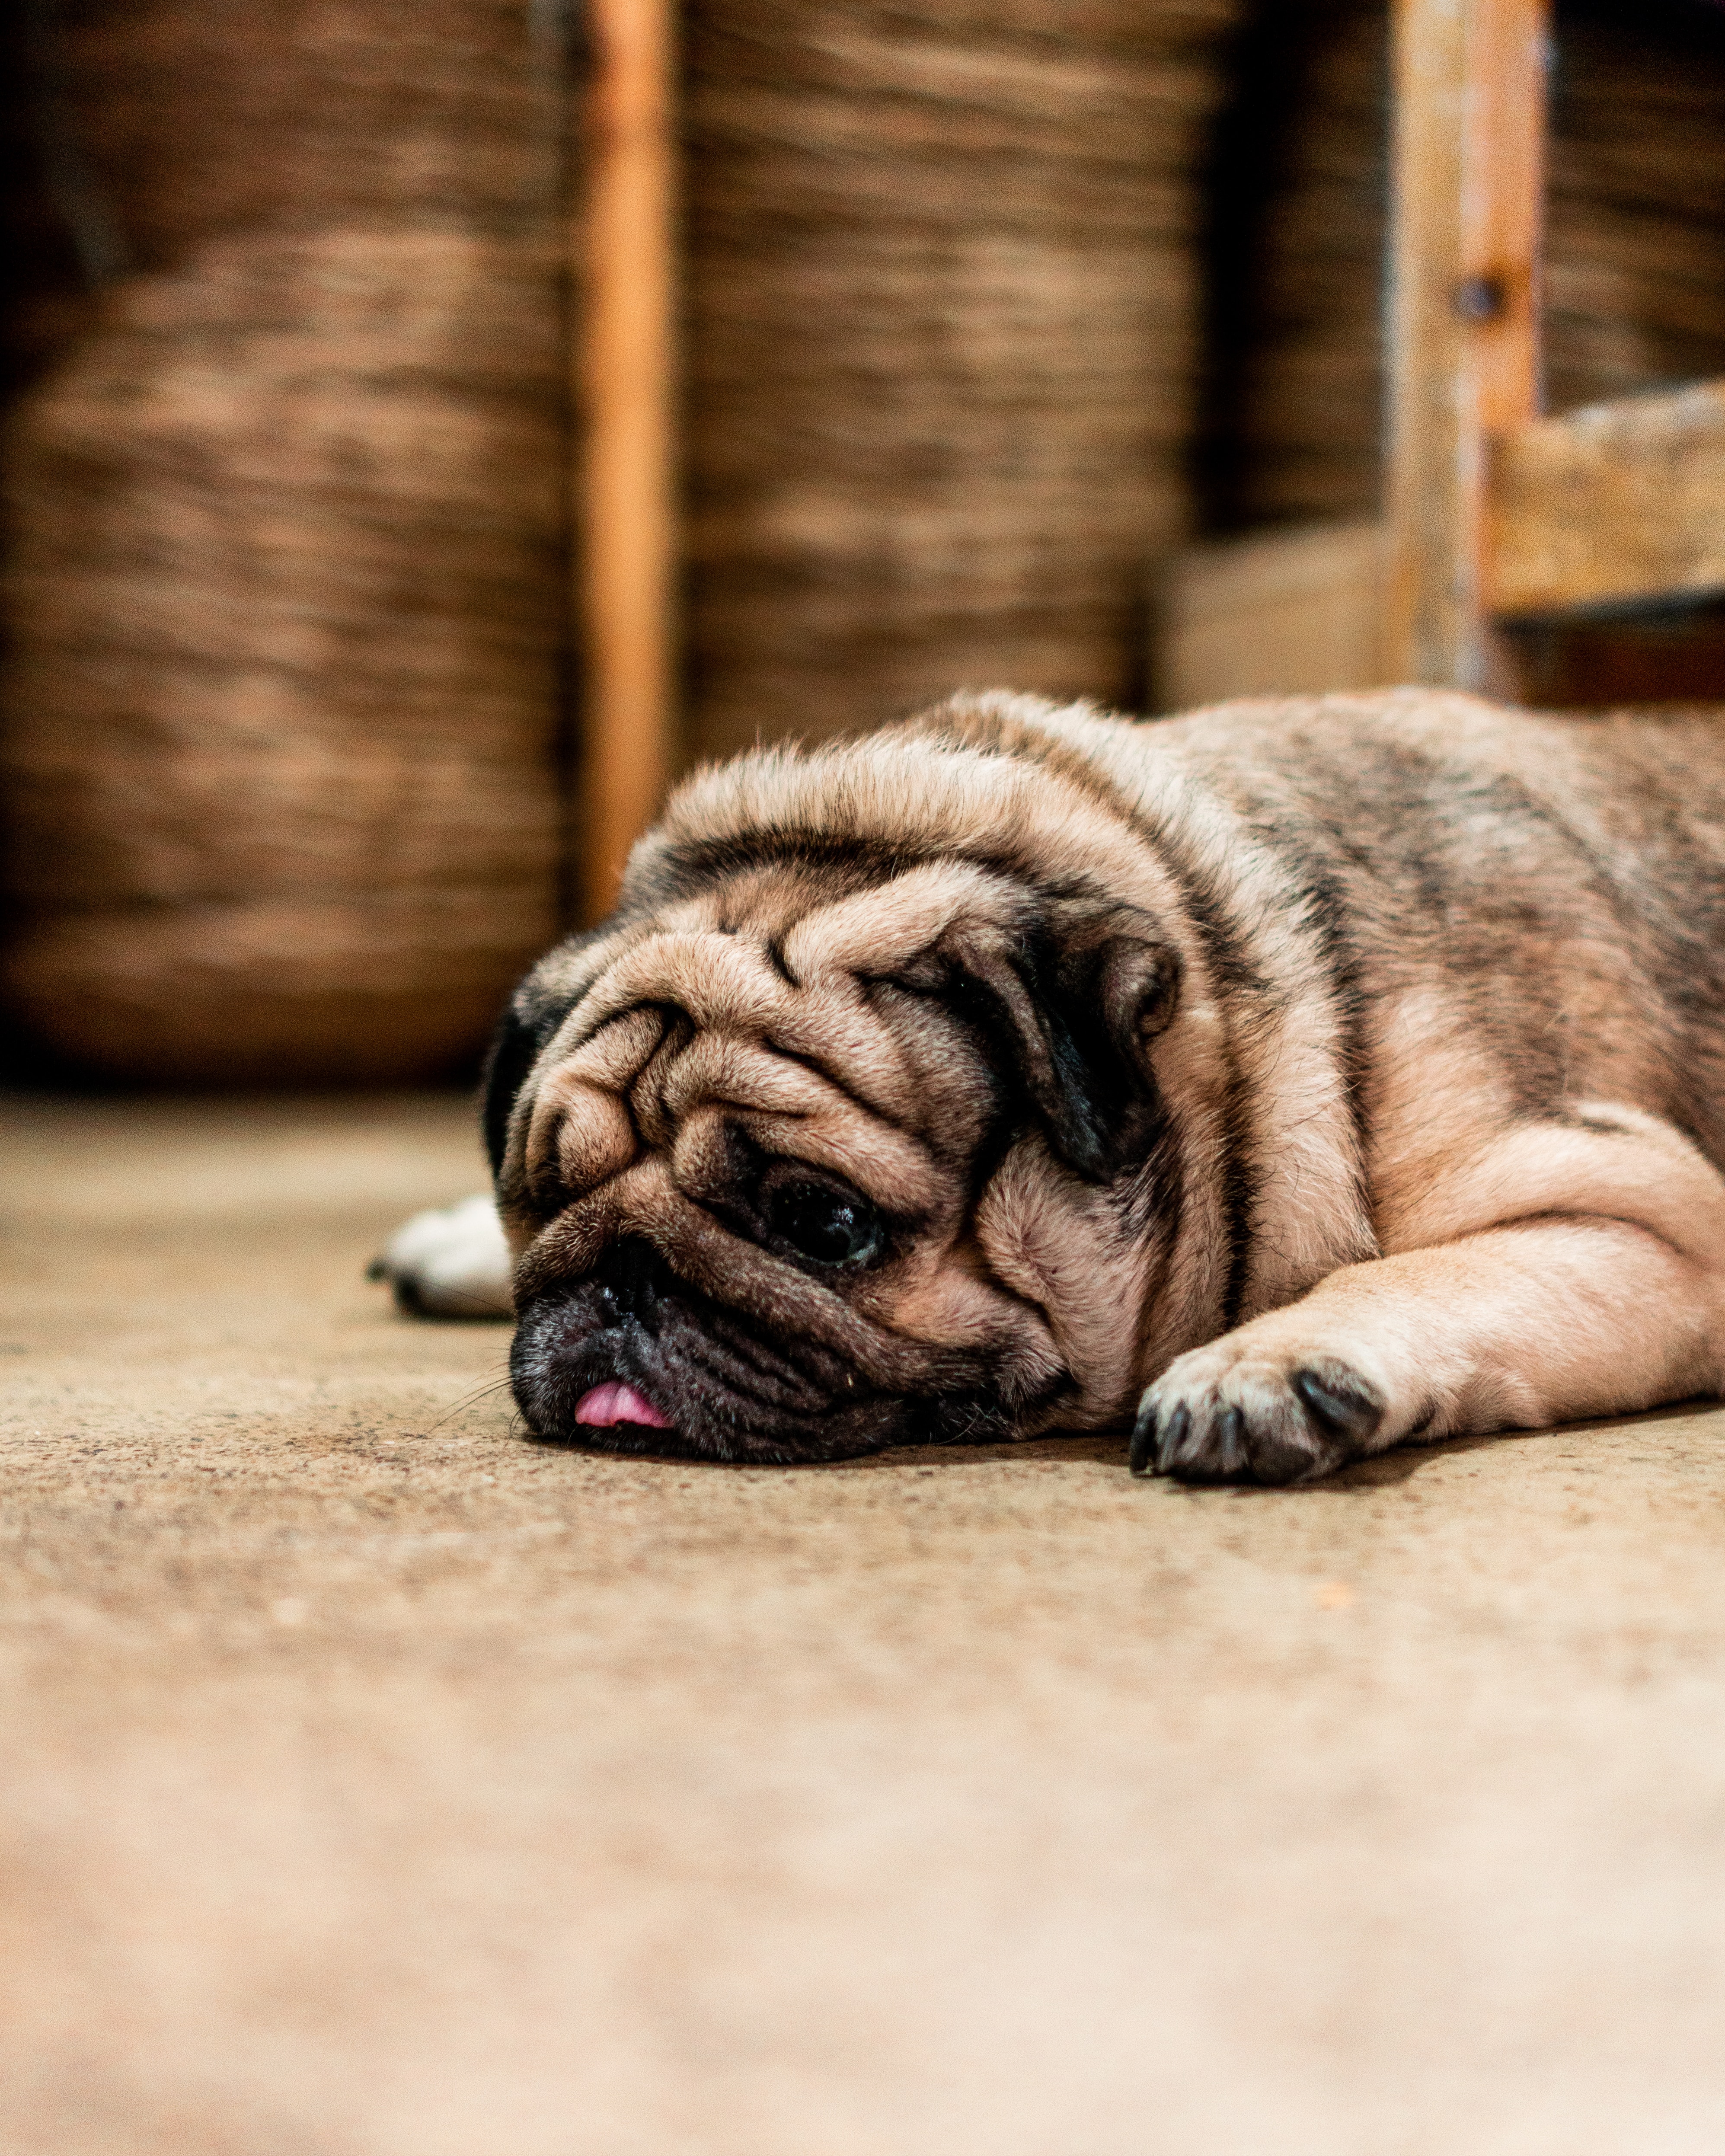 pug, animals, dog, pet, sadness, protruding tongue, tongue stuck out, sorrow wallpaper for mobile